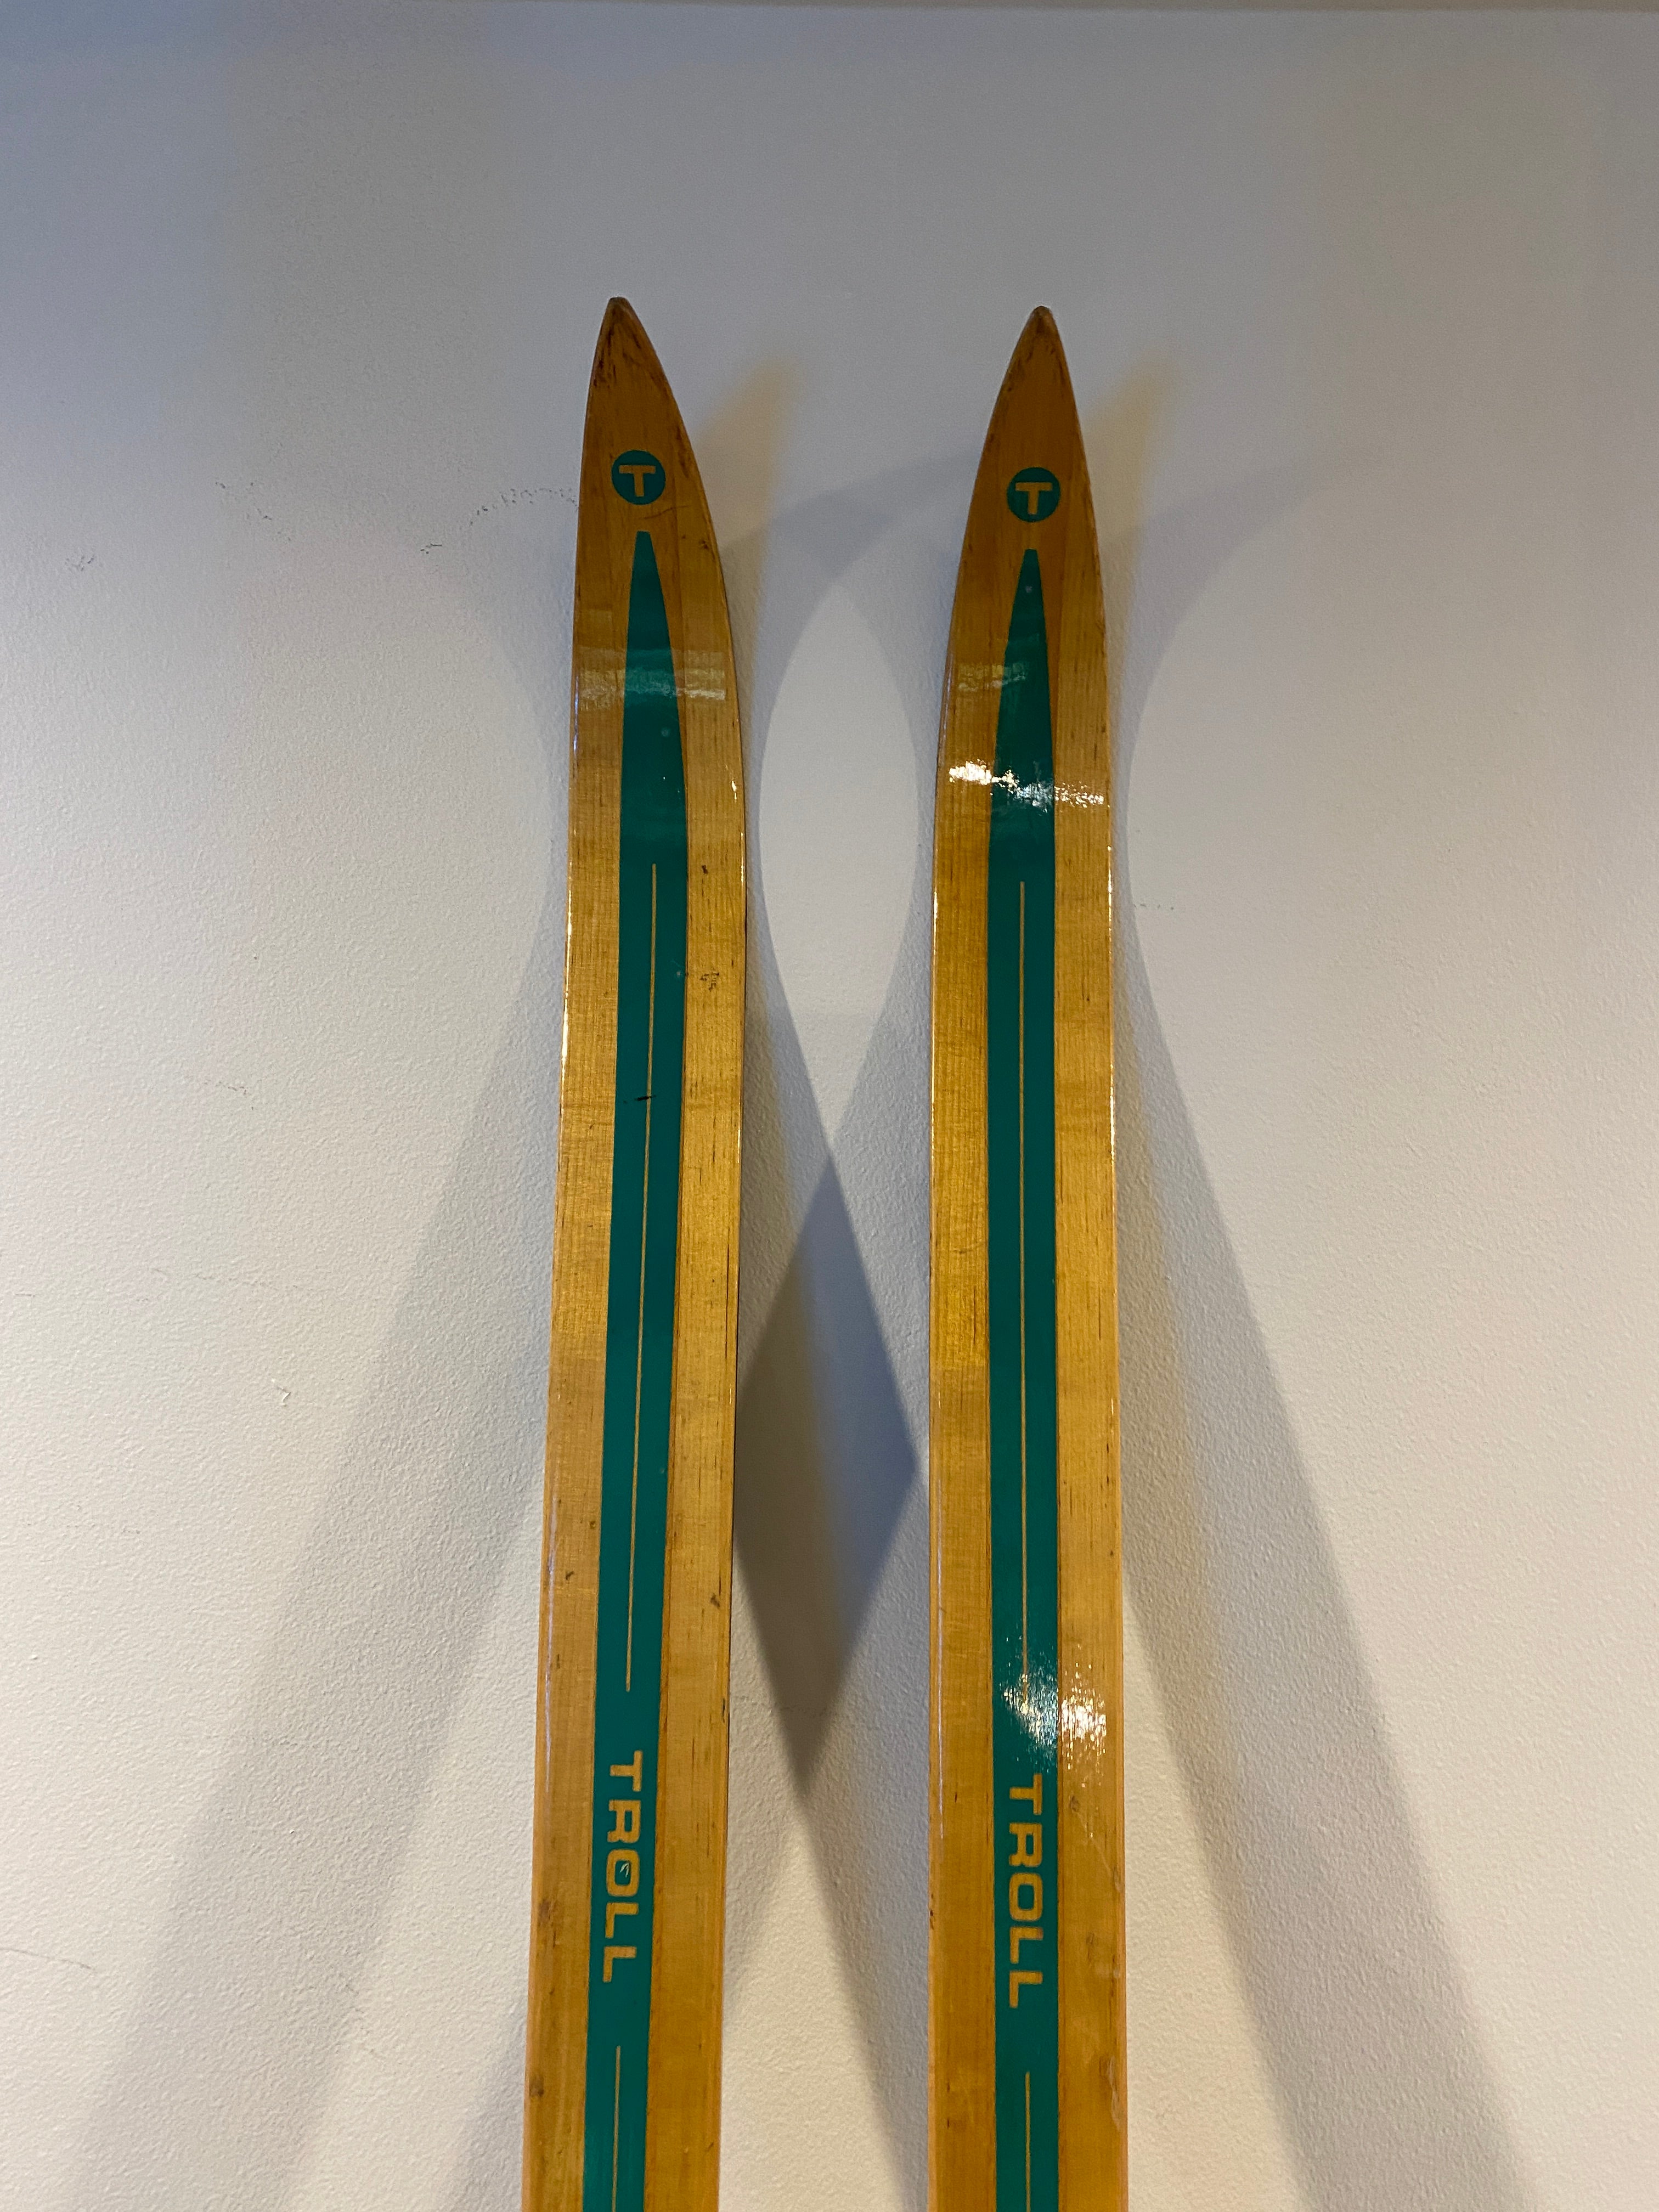 Vintage Troll 196cm skis, mounted with a pair of vintage 3-pin Rottefella bindings, ski tips